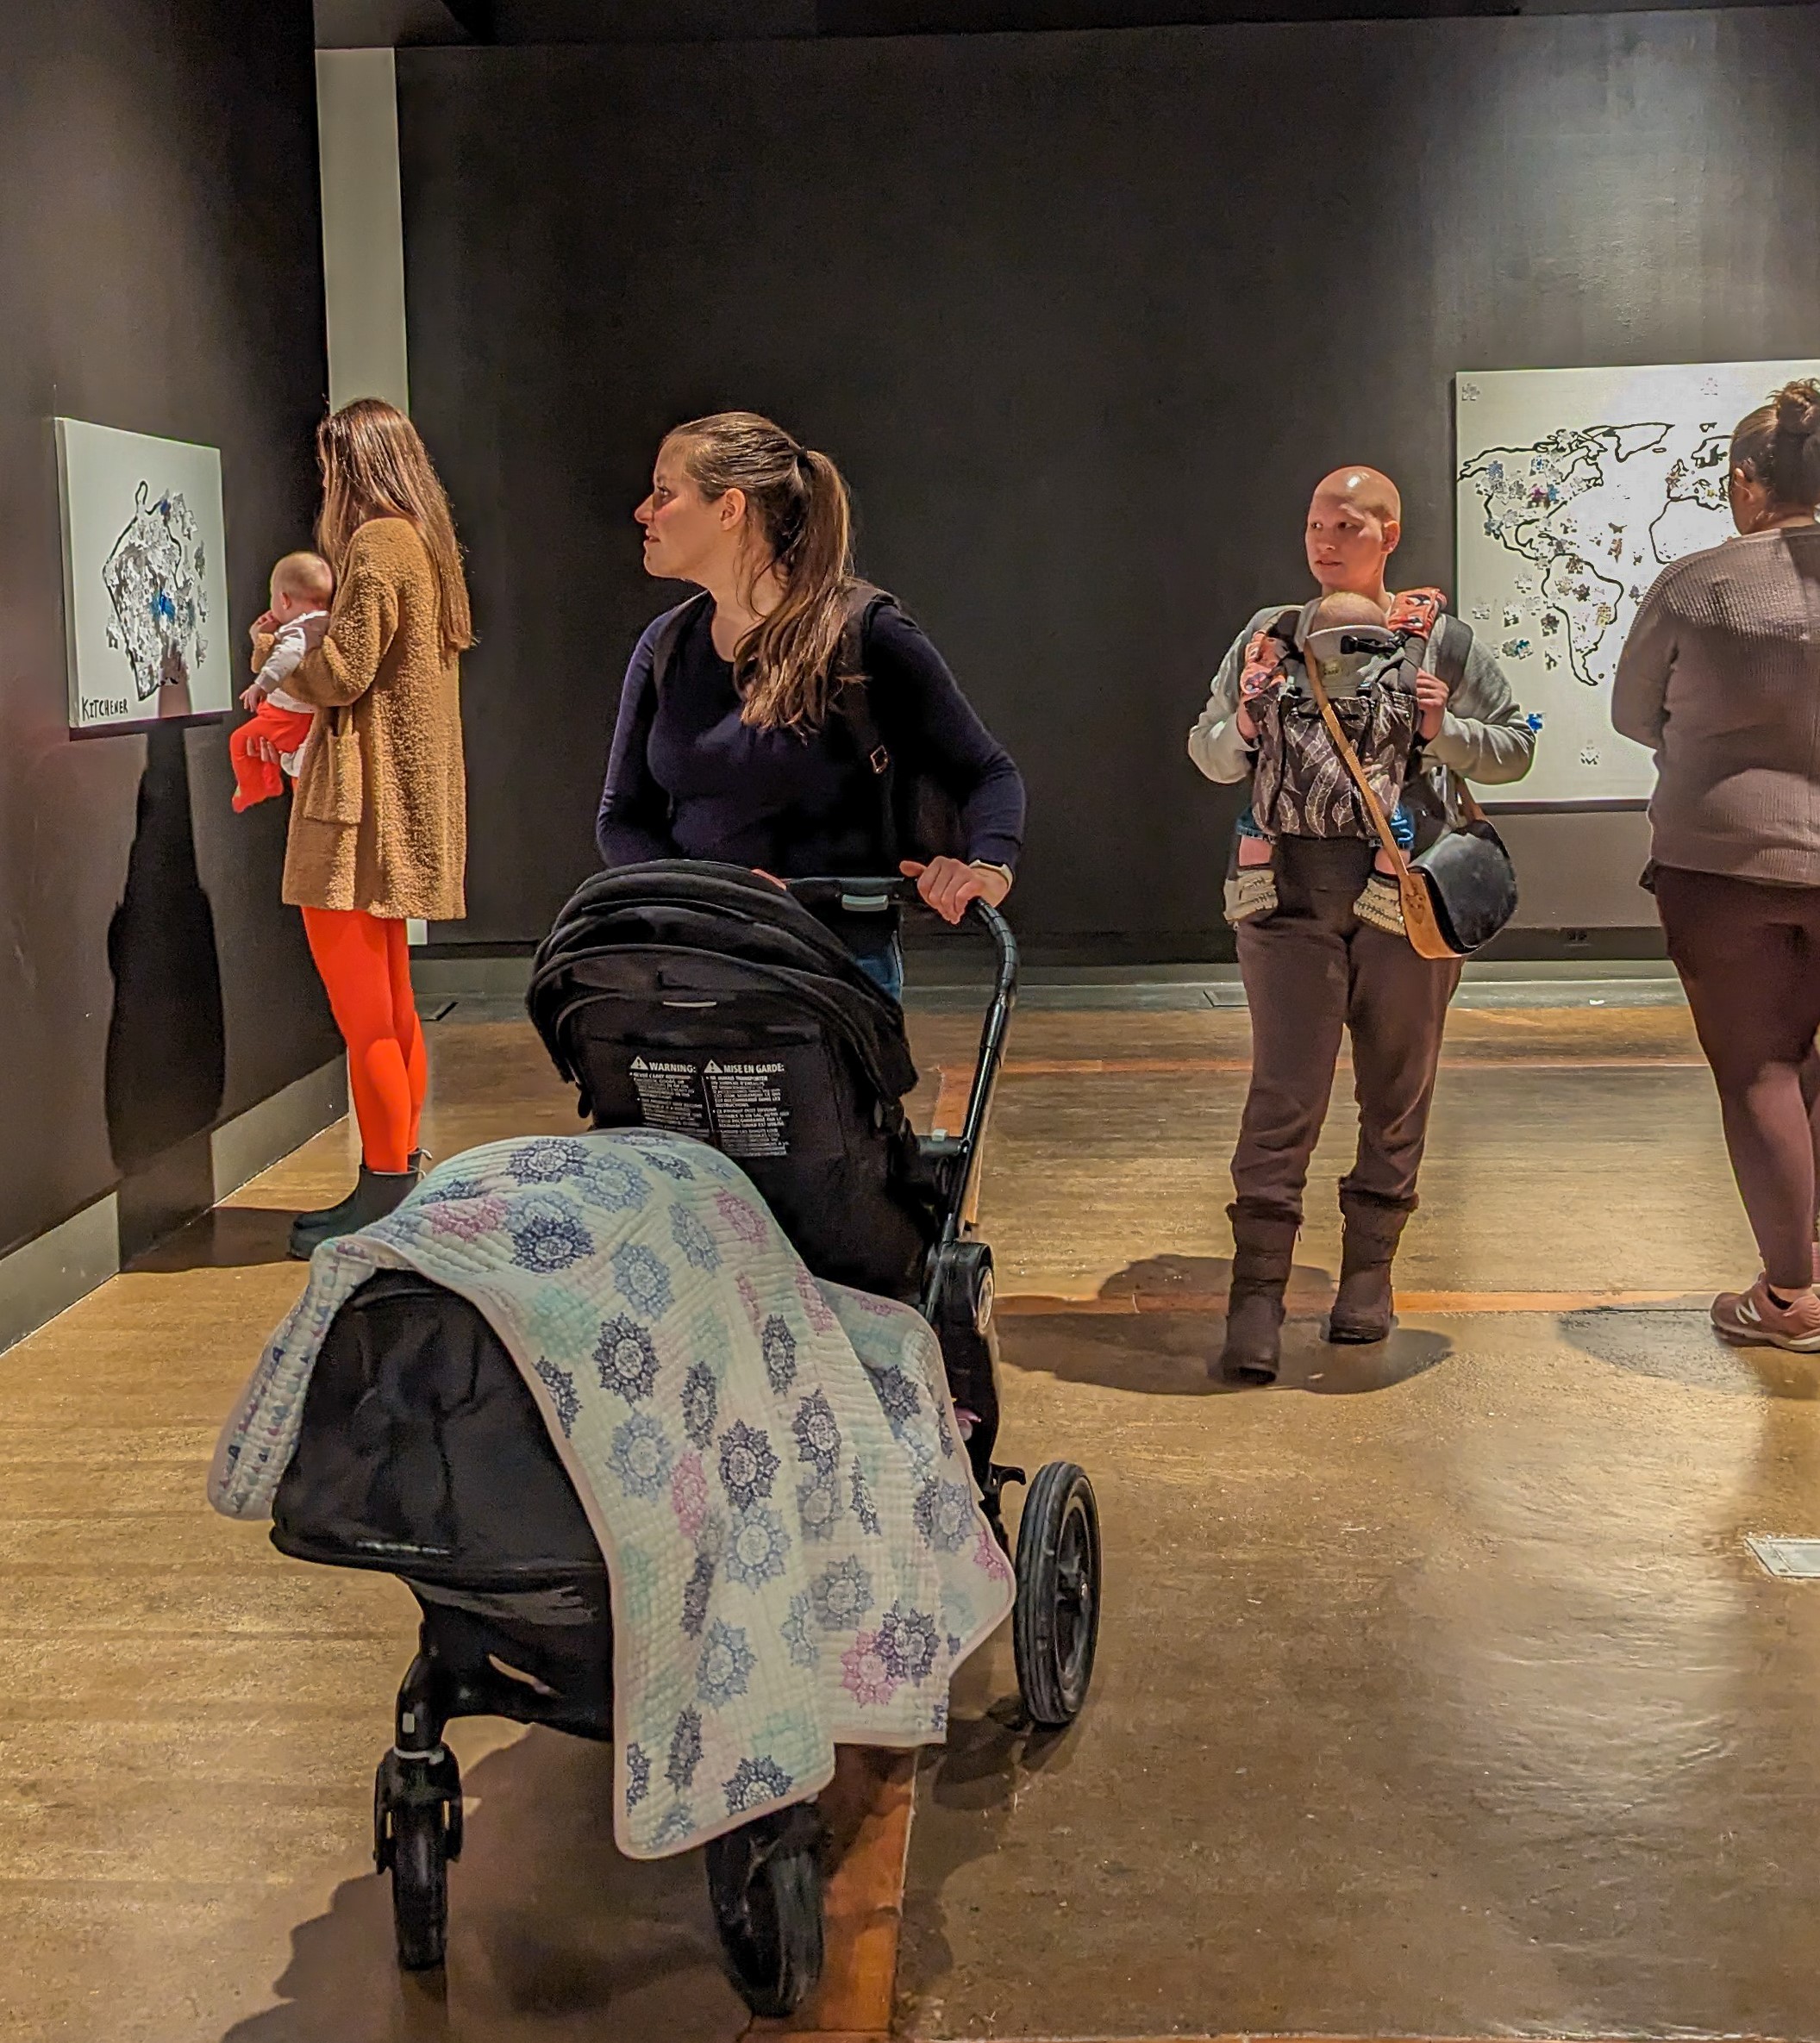 A mother with a stroller standing looking at paintings and drawing on the wall